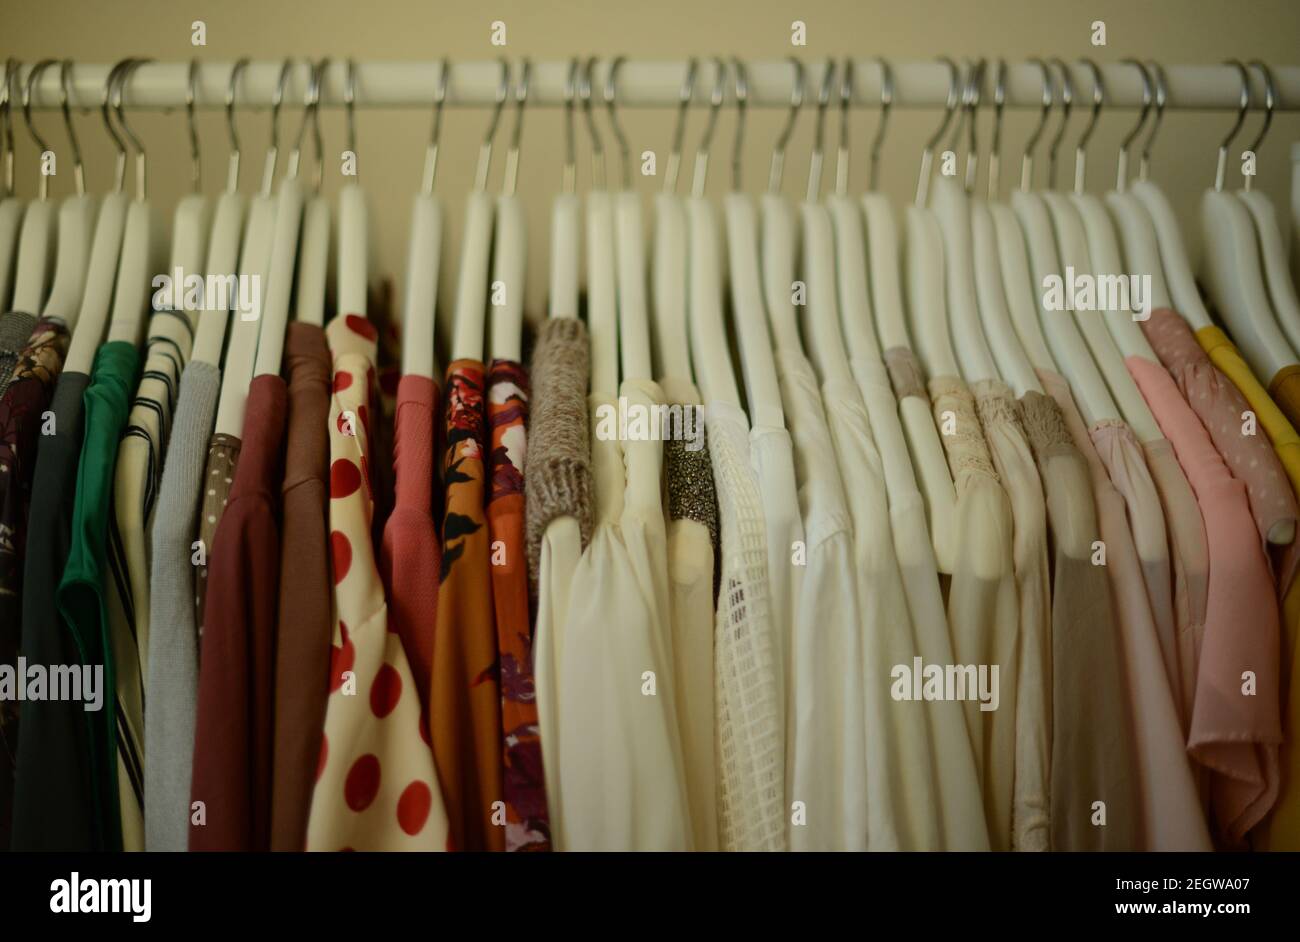 blouses in different colors hanging on white hangers on a clothing rack in a row, arranged by color Stock Photo